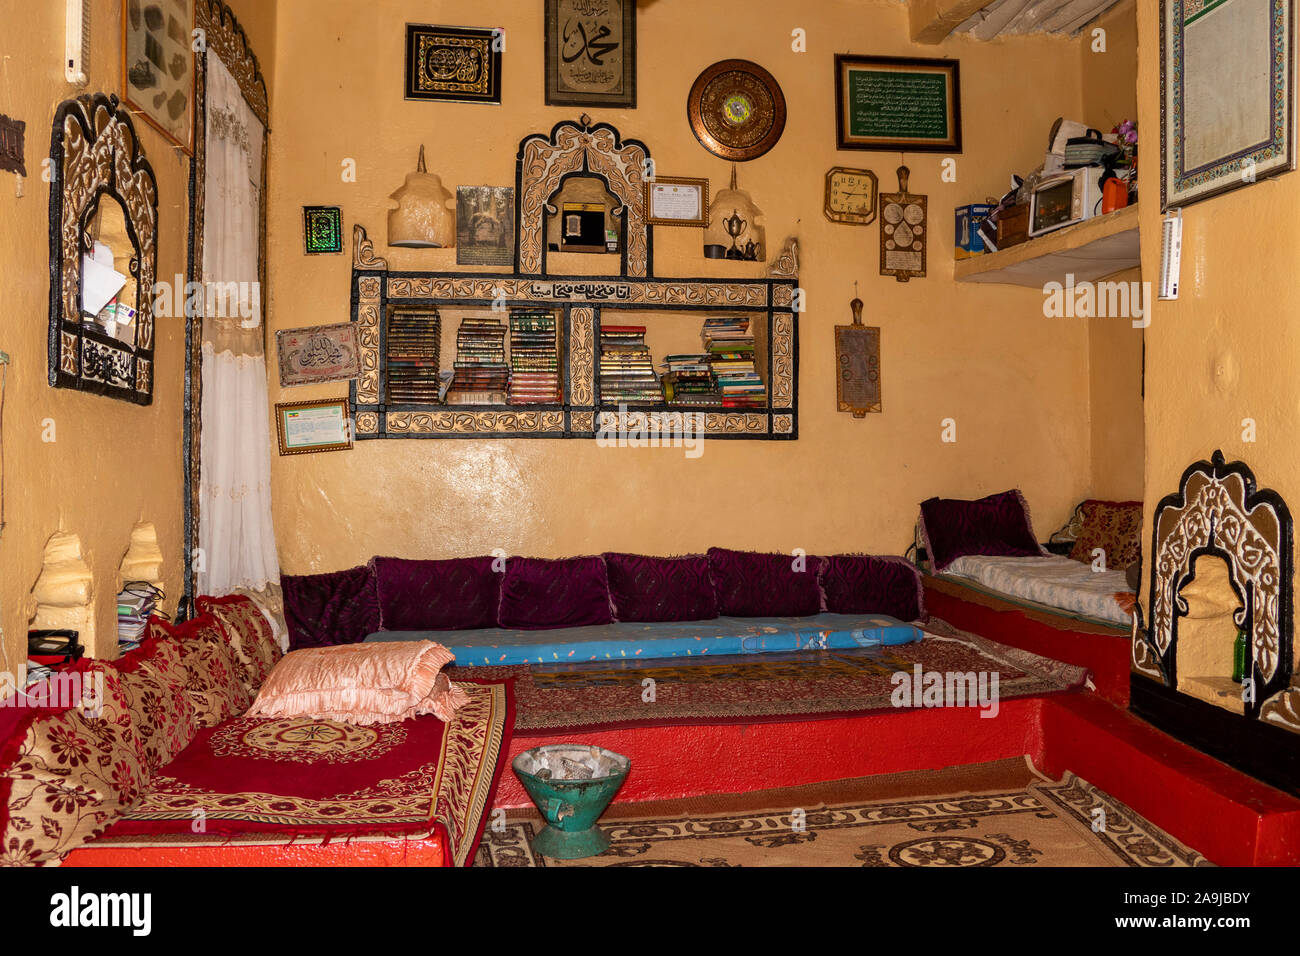 Ethiopia, East Hararghe, Harar, Harar Jugol, Old Walled City, interior of traditional house Stock Photo